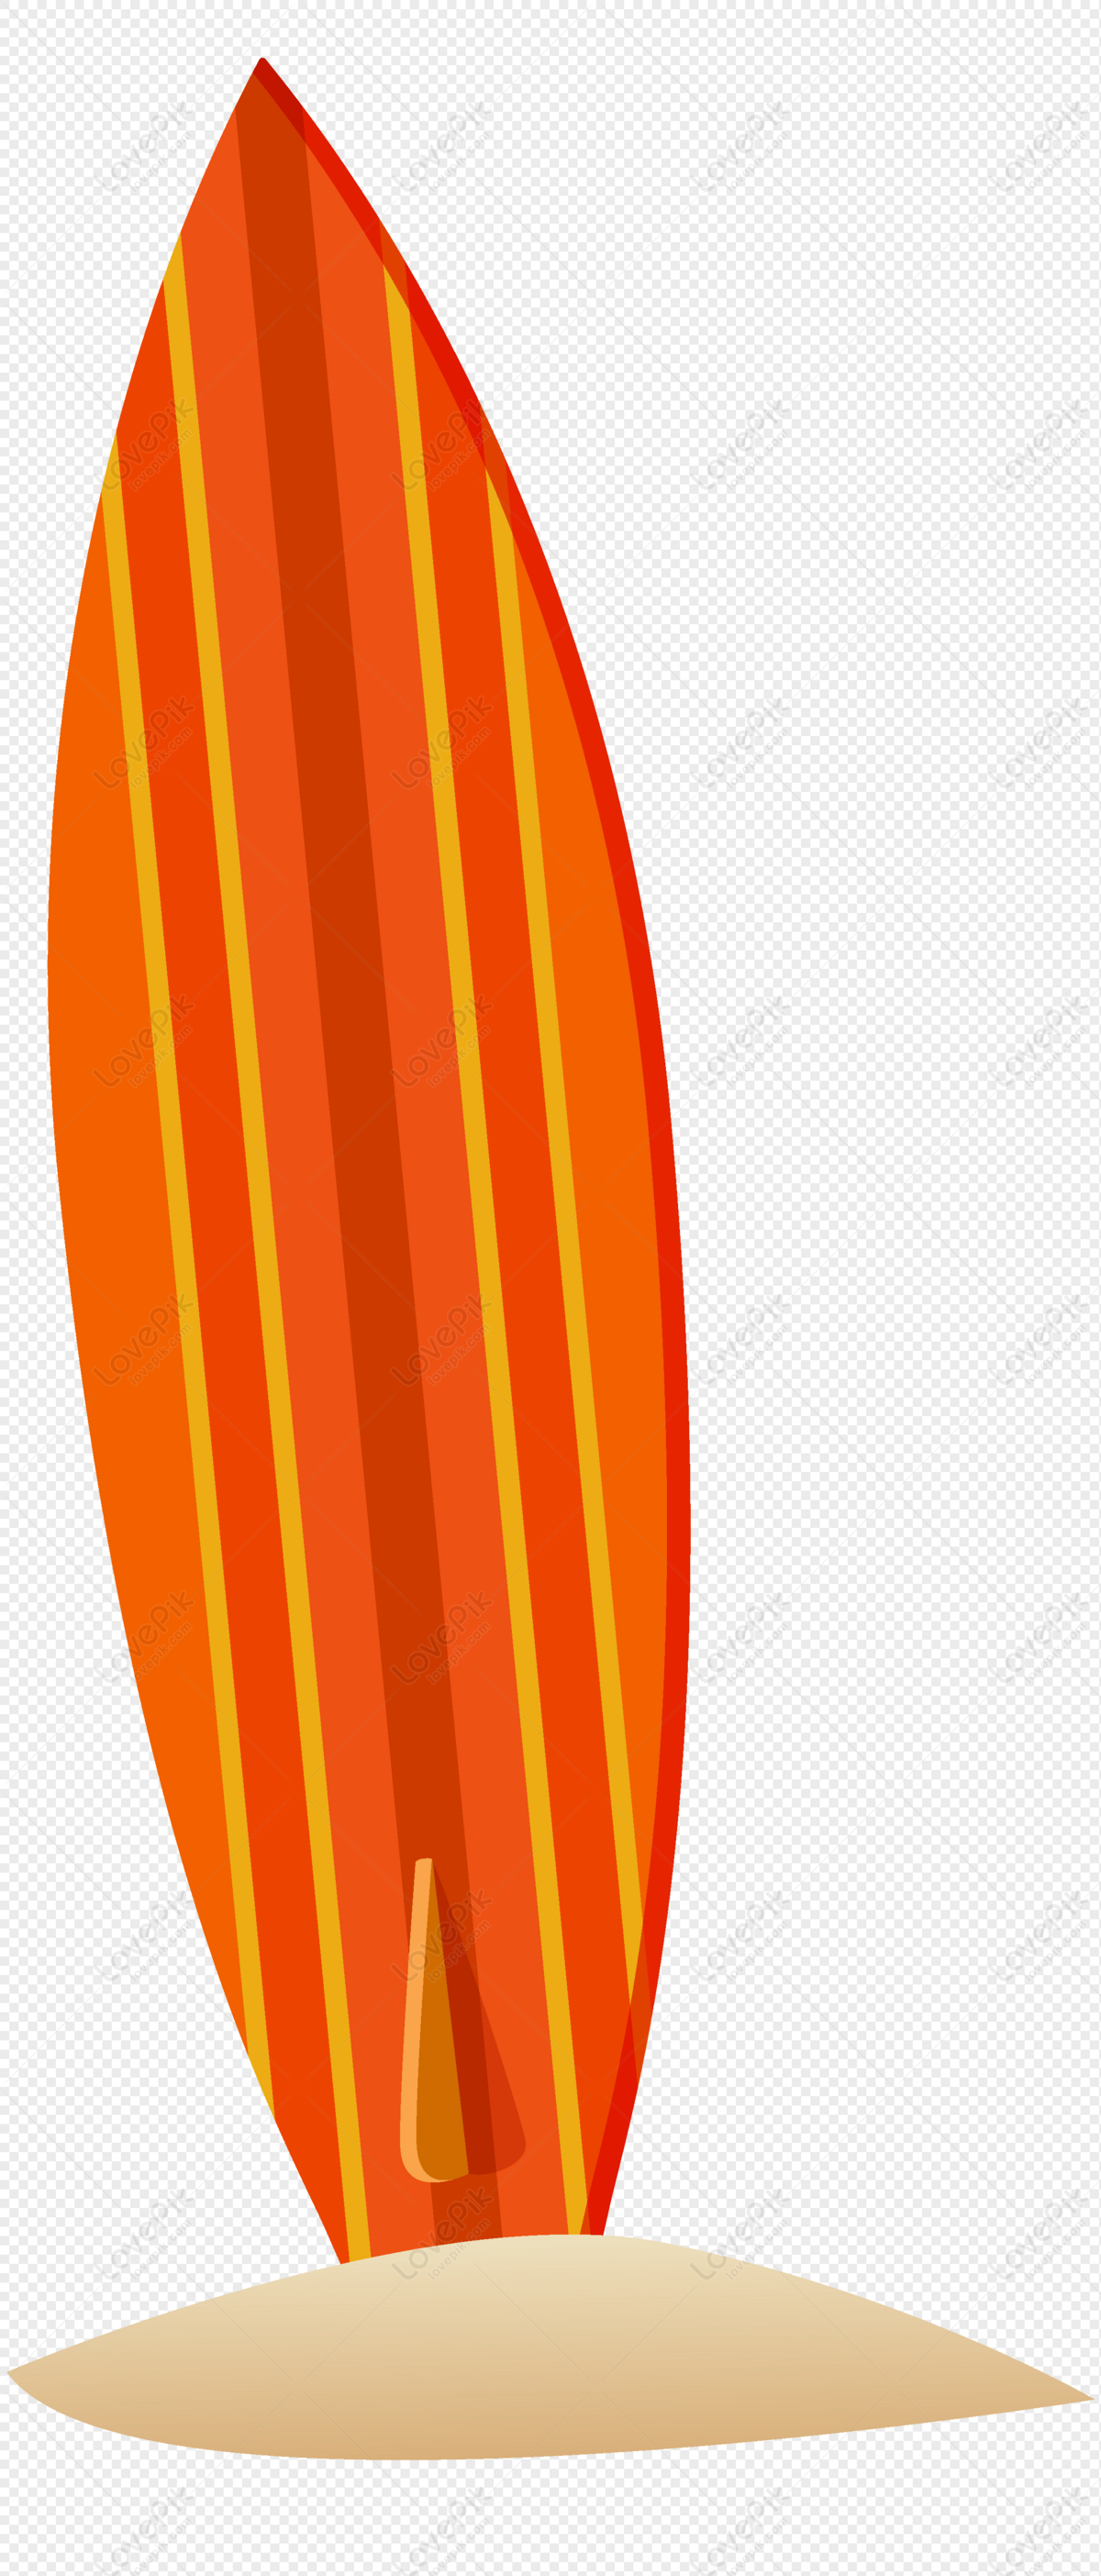 surfboard-clipart-png-images-surfboard-surfboard-clipart-paddling